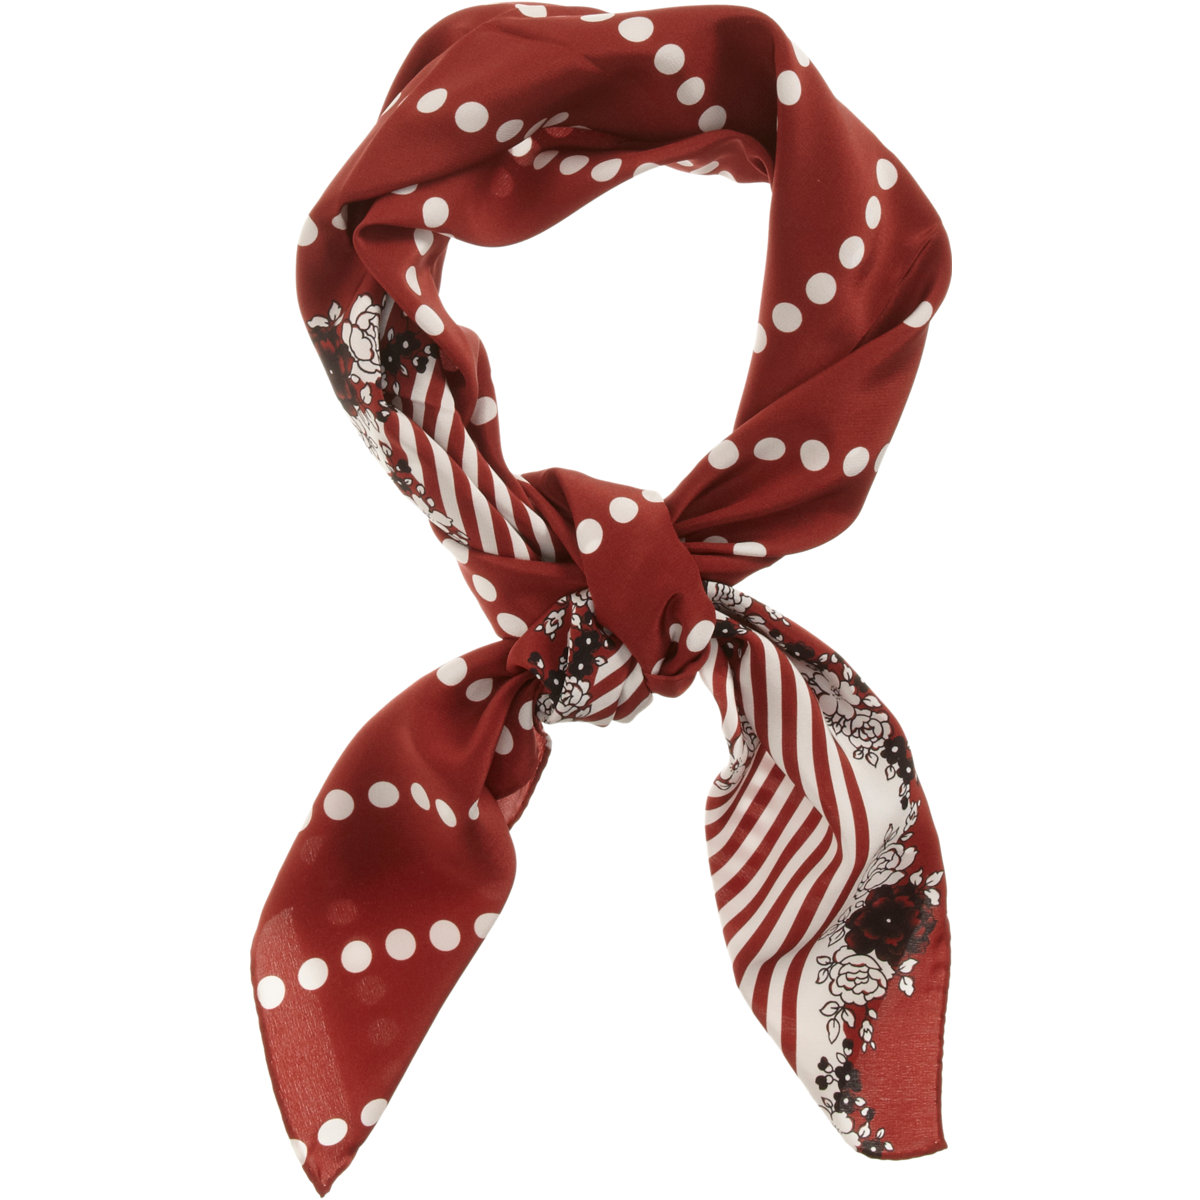 Marni Polka Dot Scarf in Red (floral) | Lyst